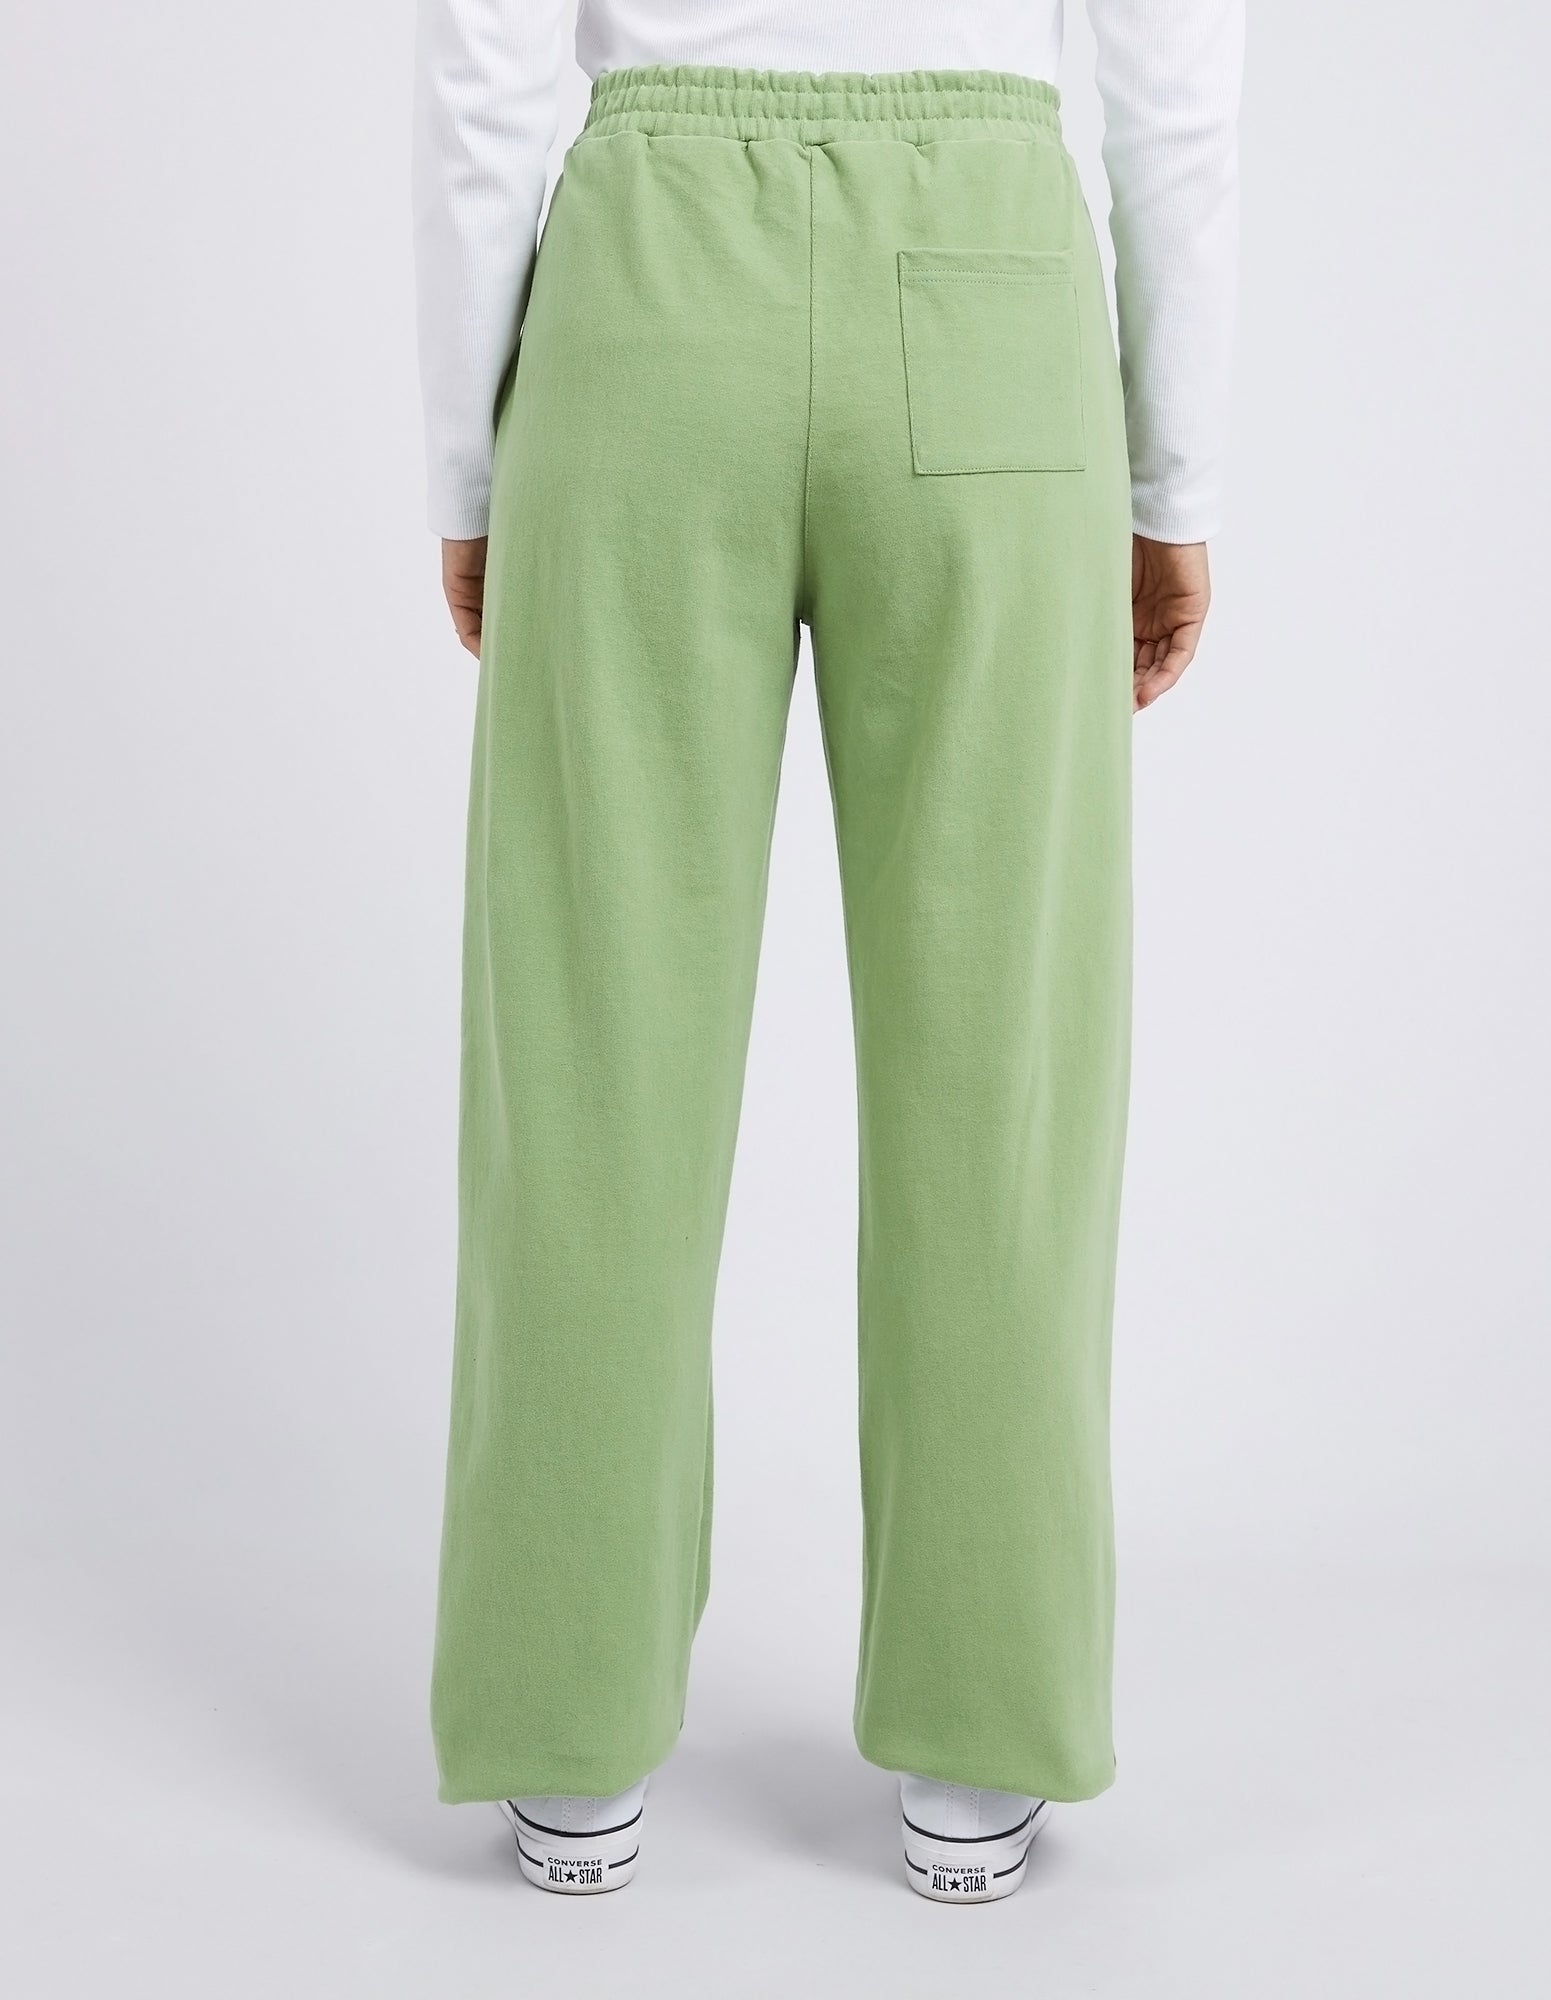 On The Go Pant Jungle Green